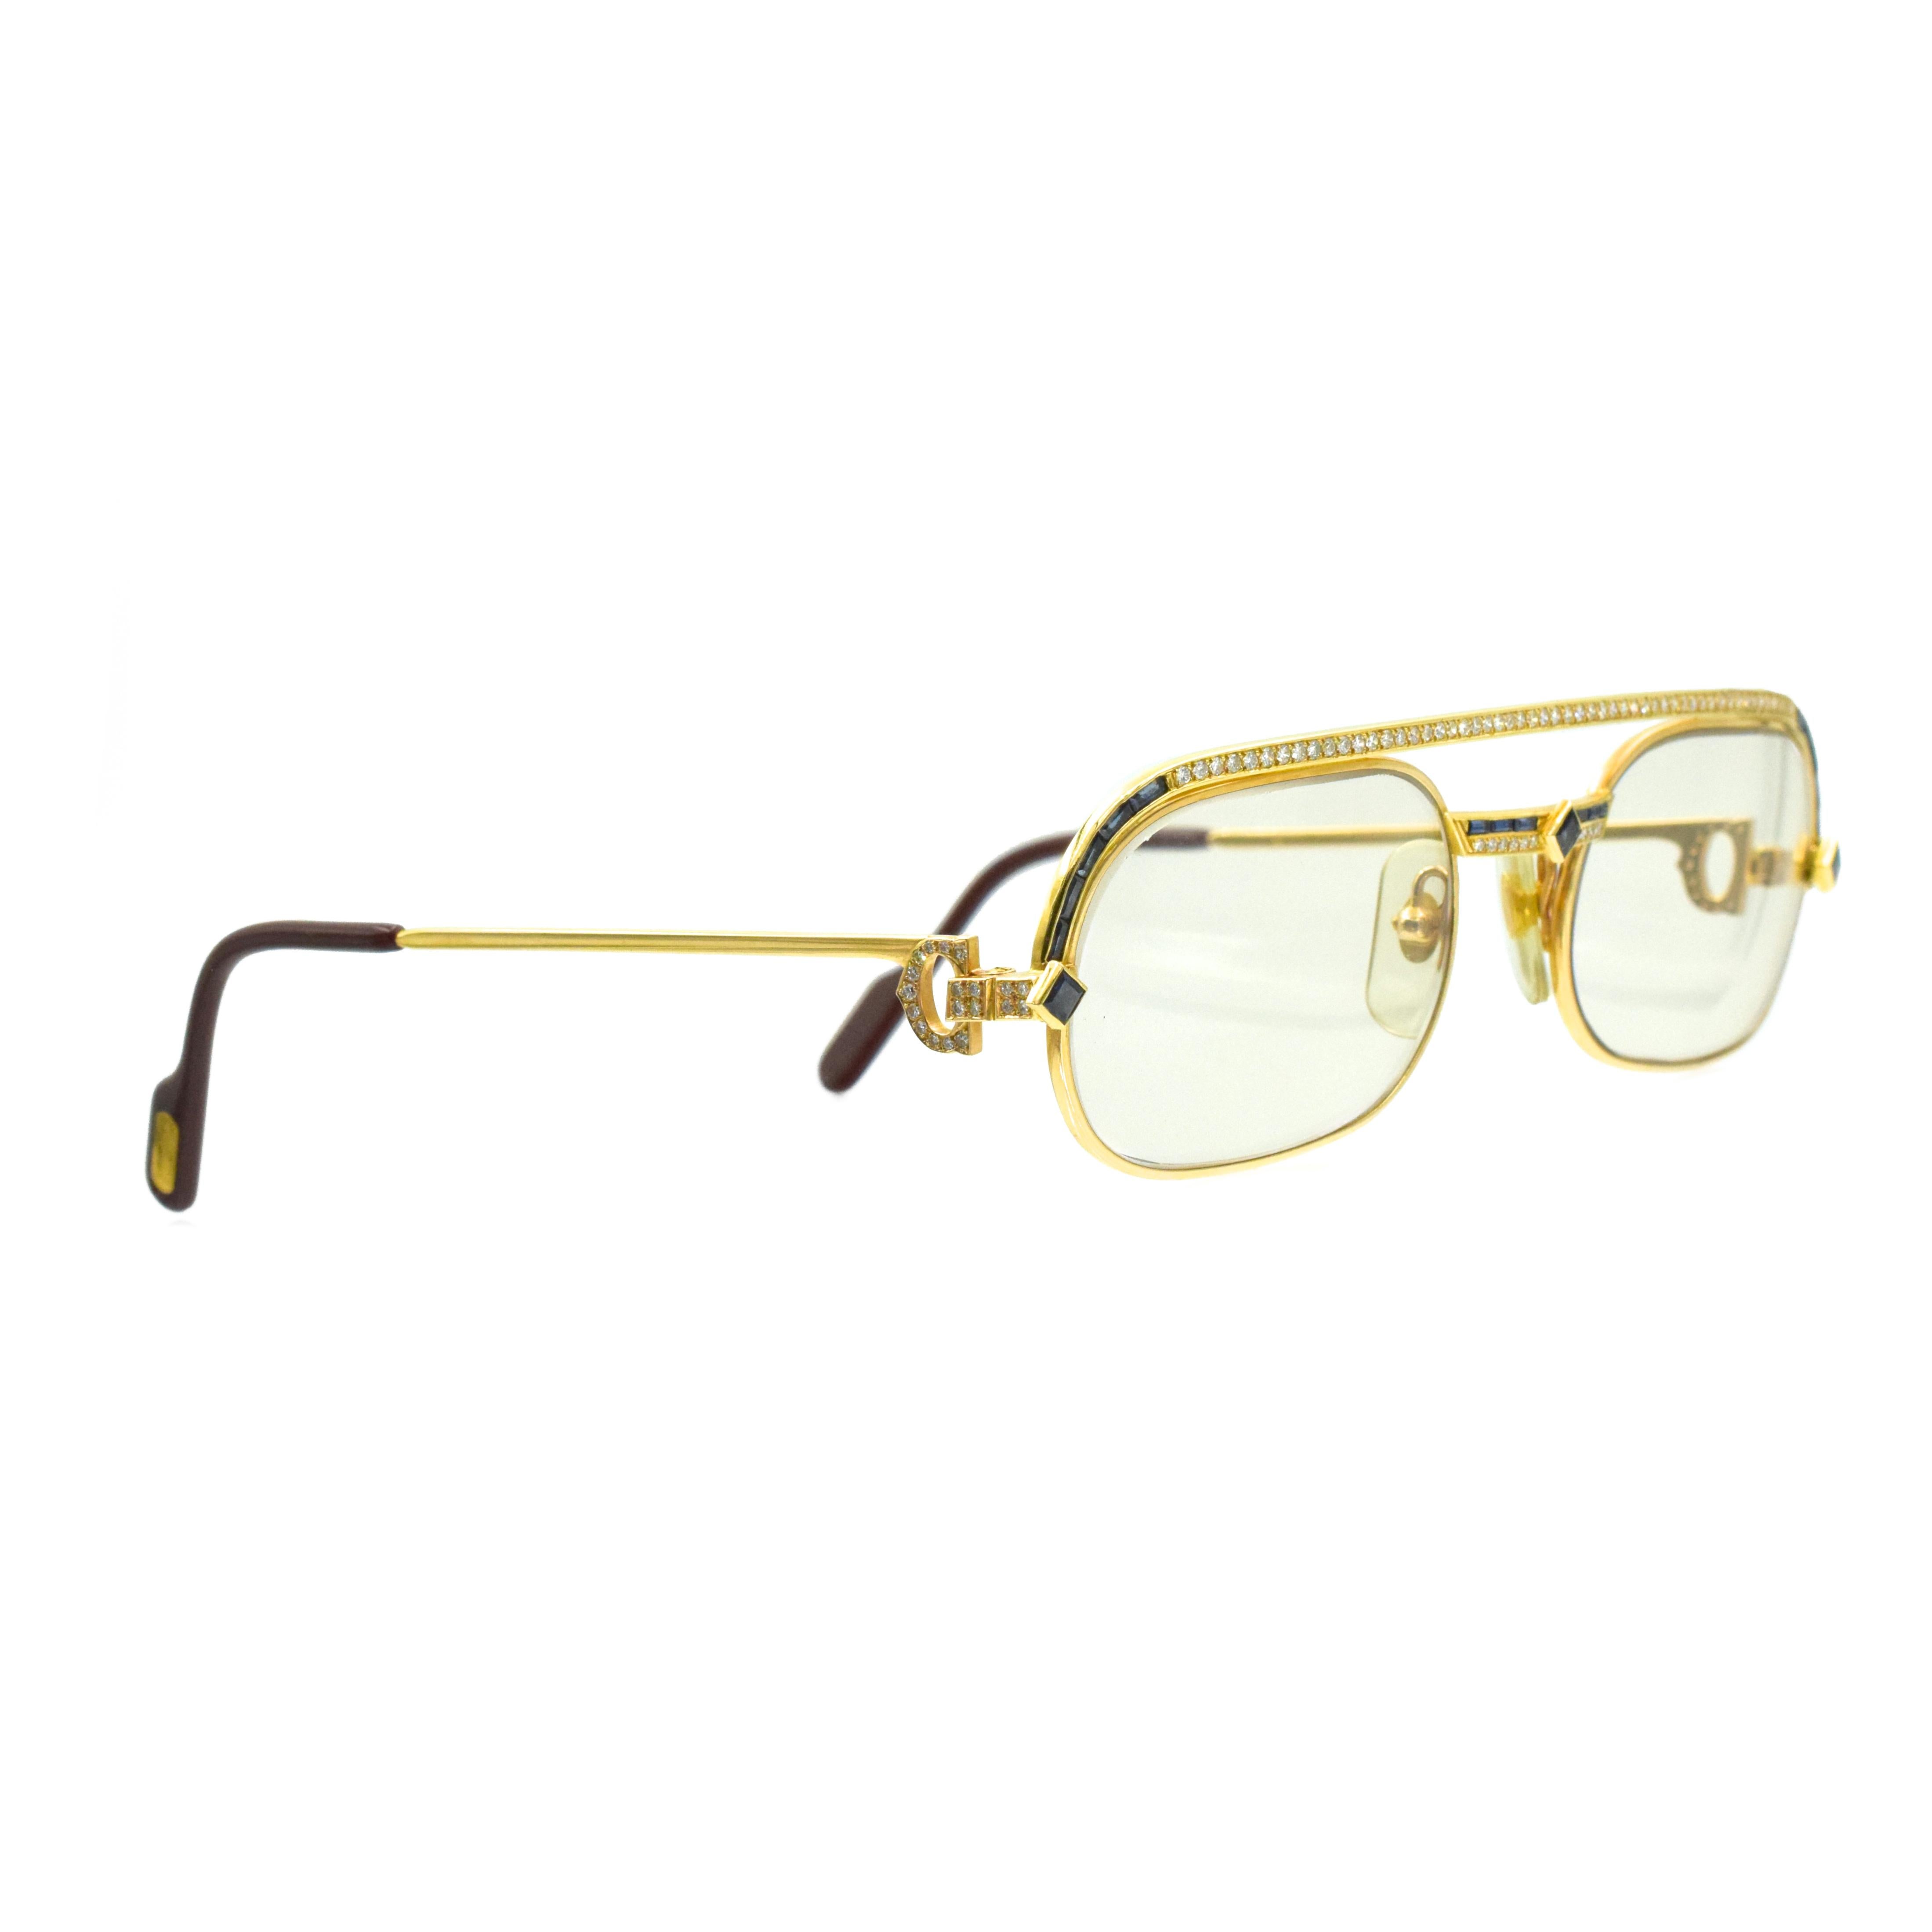 Cartier Gold, Diamond and Sapphire Eyeglasses, France 3